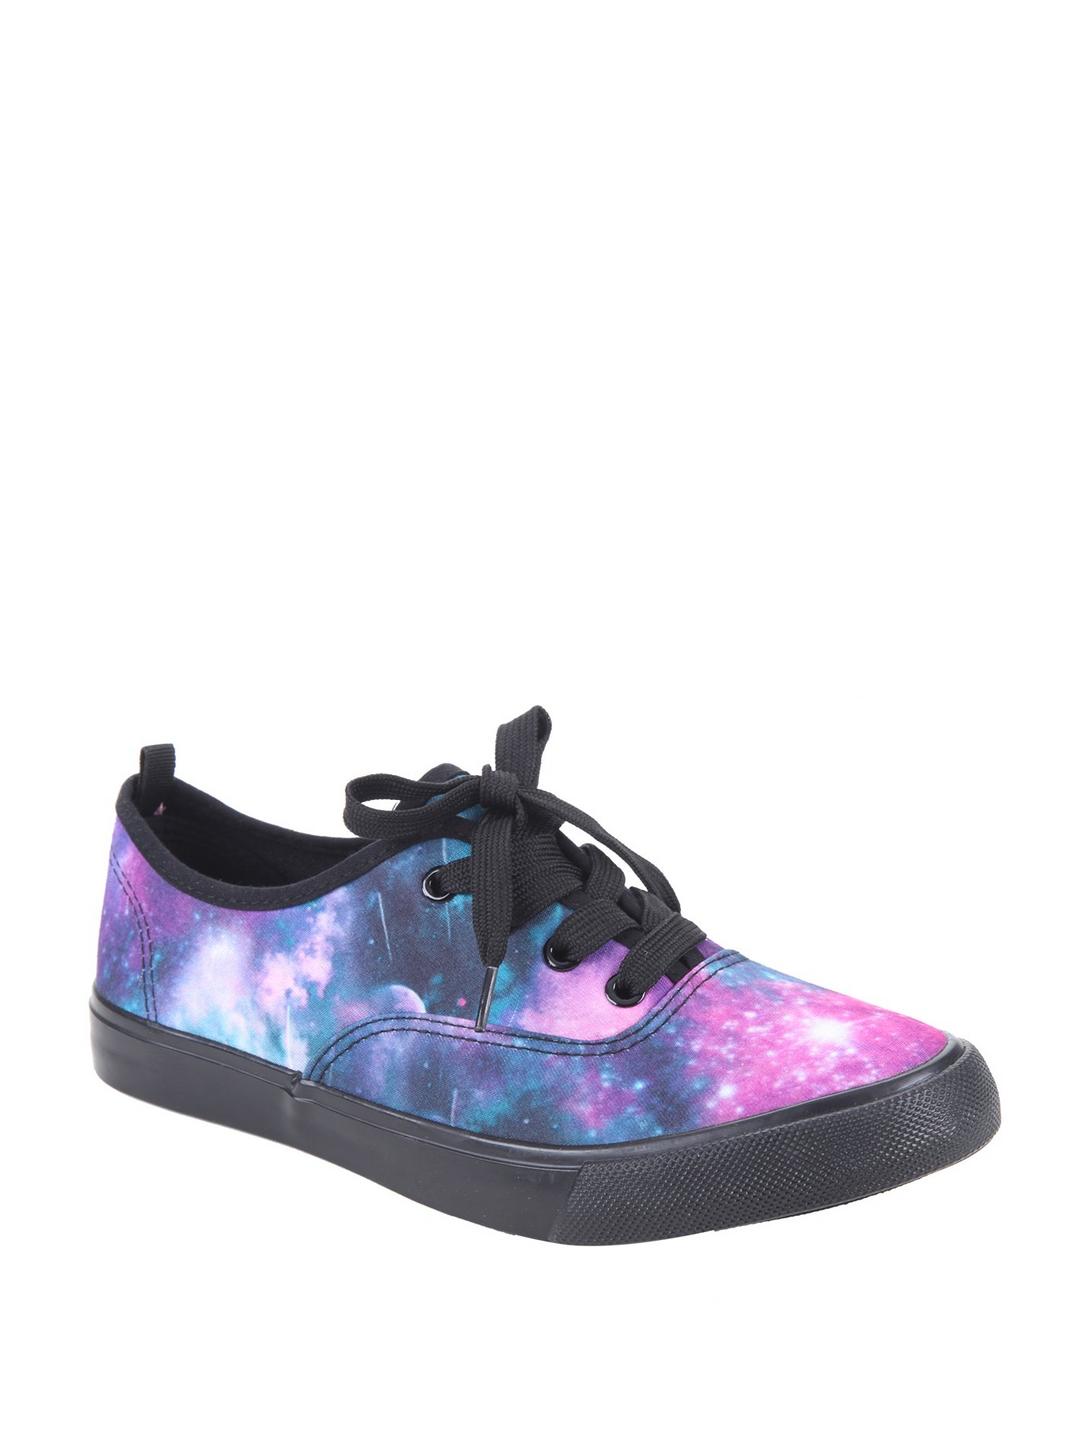 Galaxy Lace-Up Sneakers, MULTI, hi-res